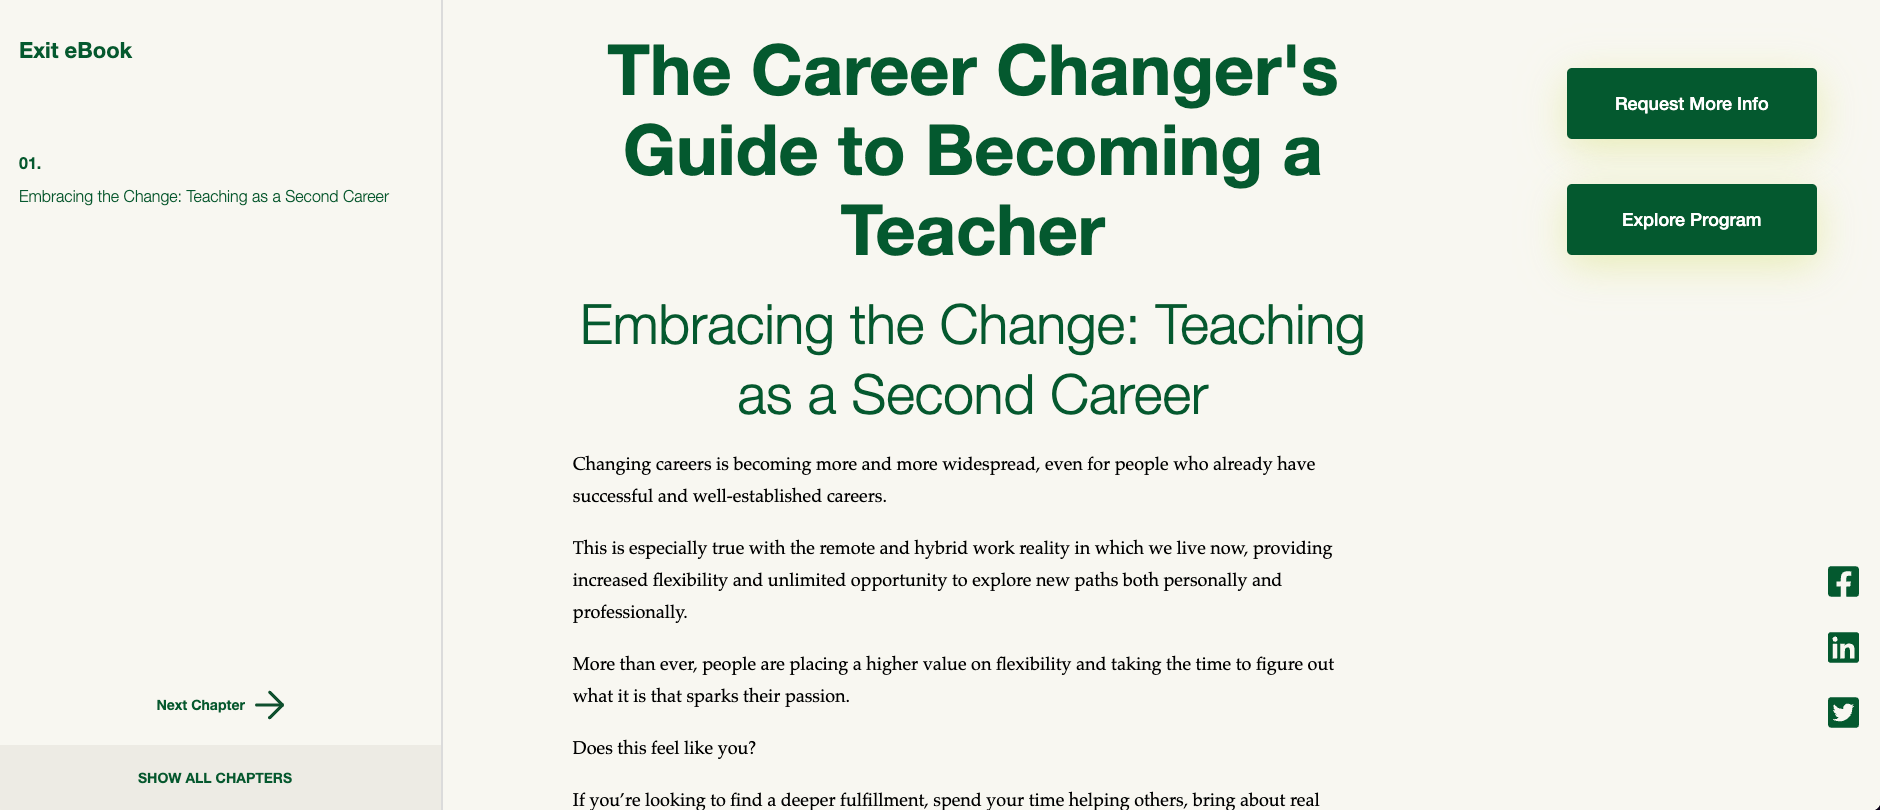 The Career Changer's Guide to Becoming a Teacher: Introductory text that showcases Southern's new eBook.